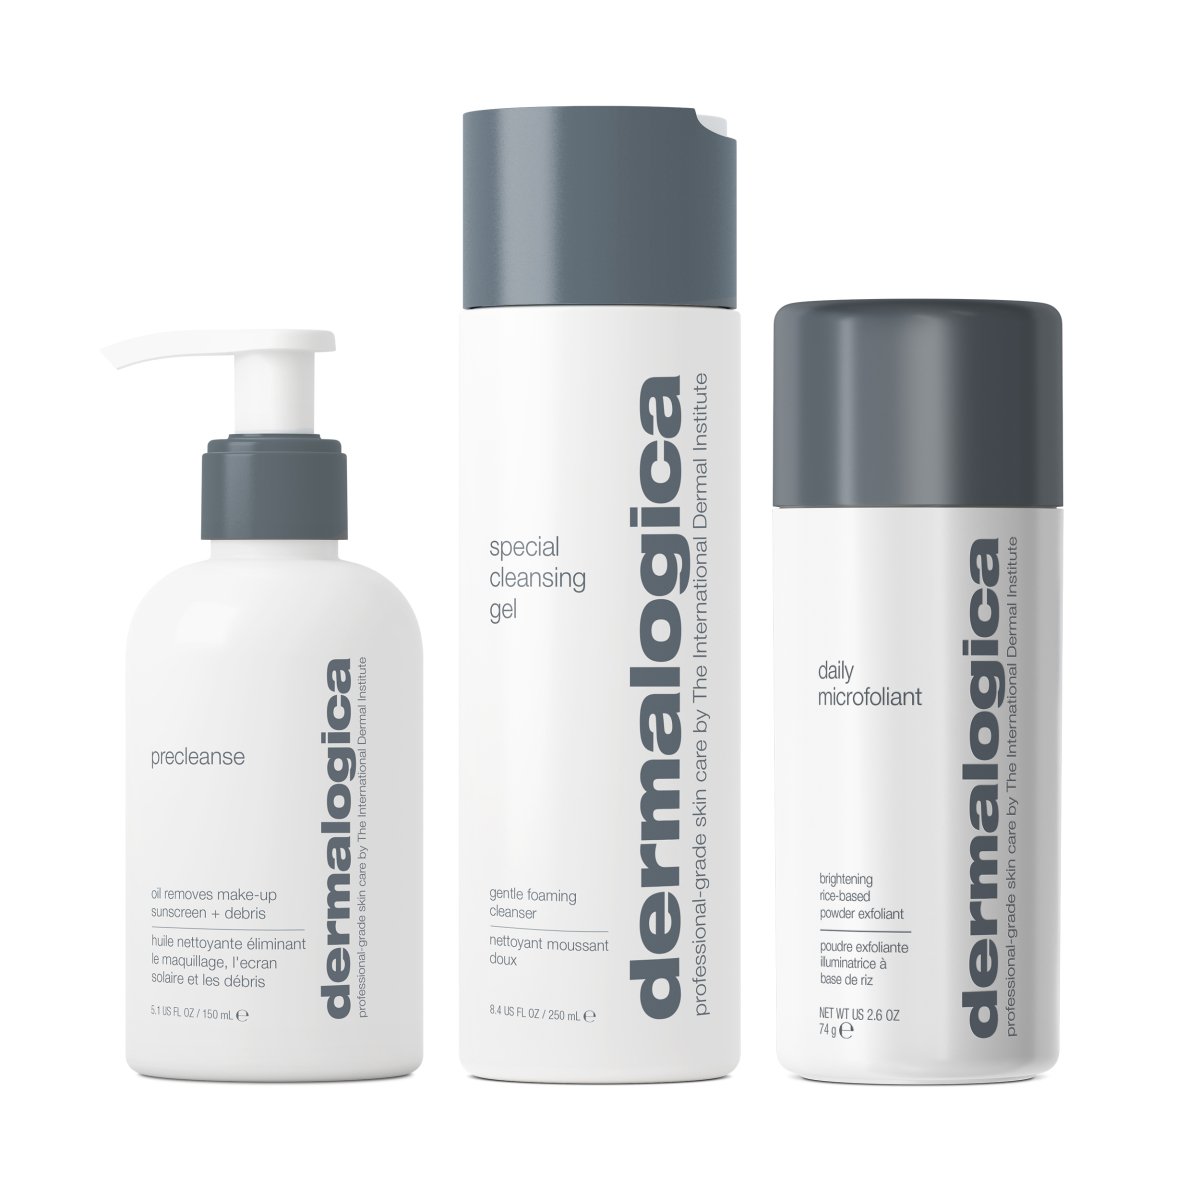 Dermalogica Best Cleanse and Glow Set - Emerald Beauty & Spa